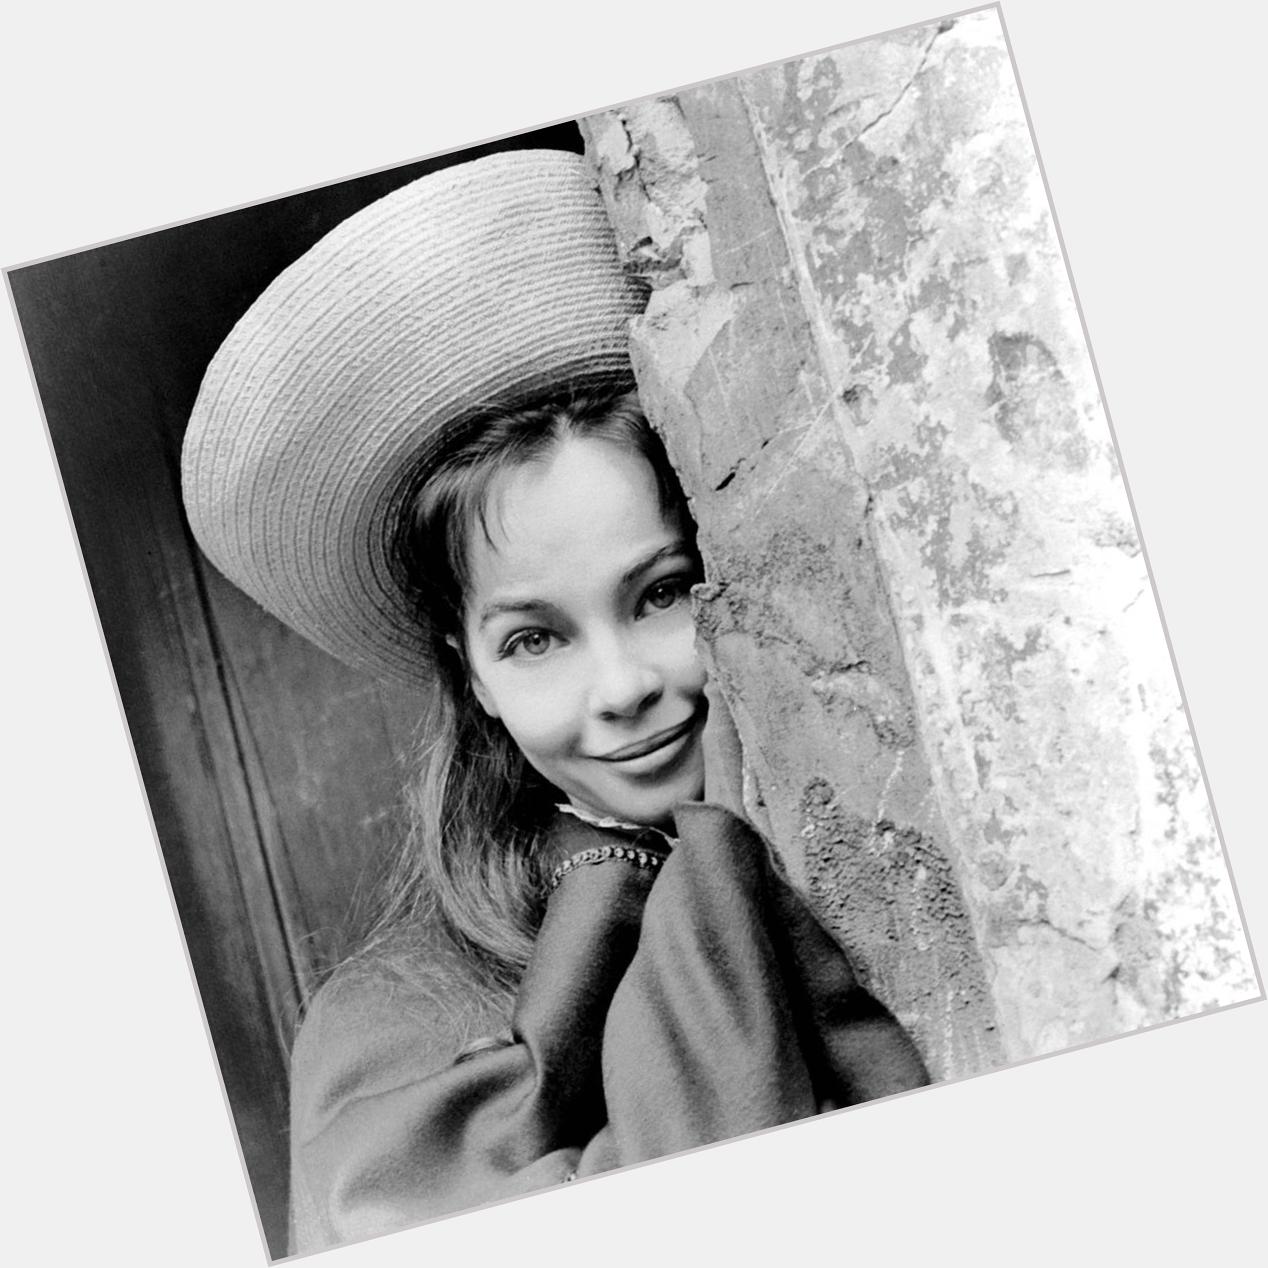   Join us in wishing the lovely Leslie Caron a happy birthday! 